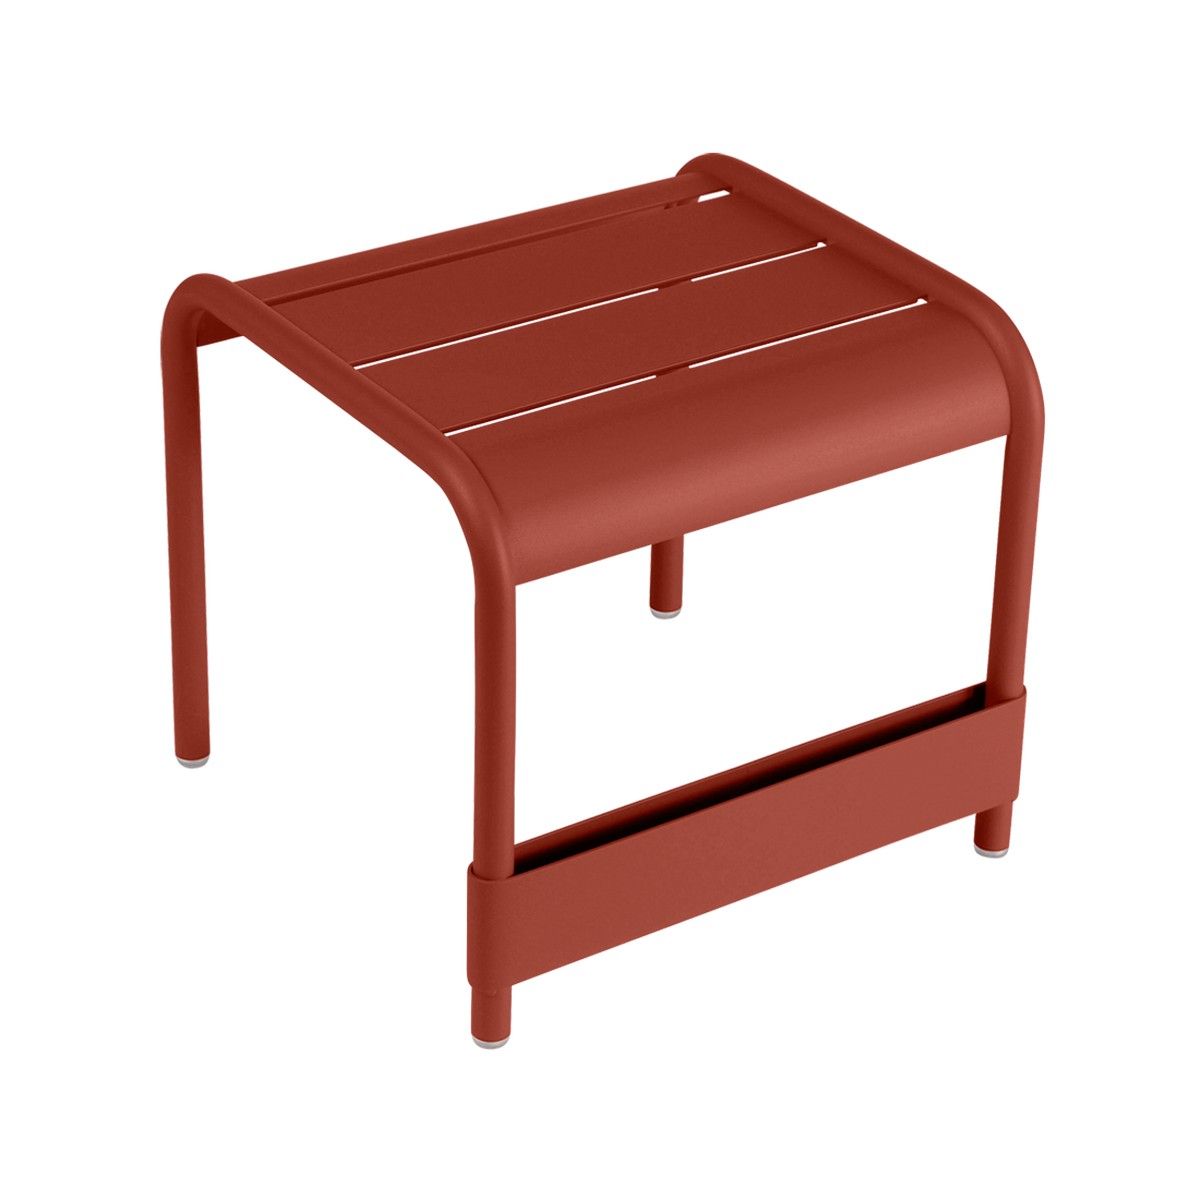 Fermob Luxembourg Table basse Luxembourg petite Rouge ocre L 43 x l 42 x H40cm